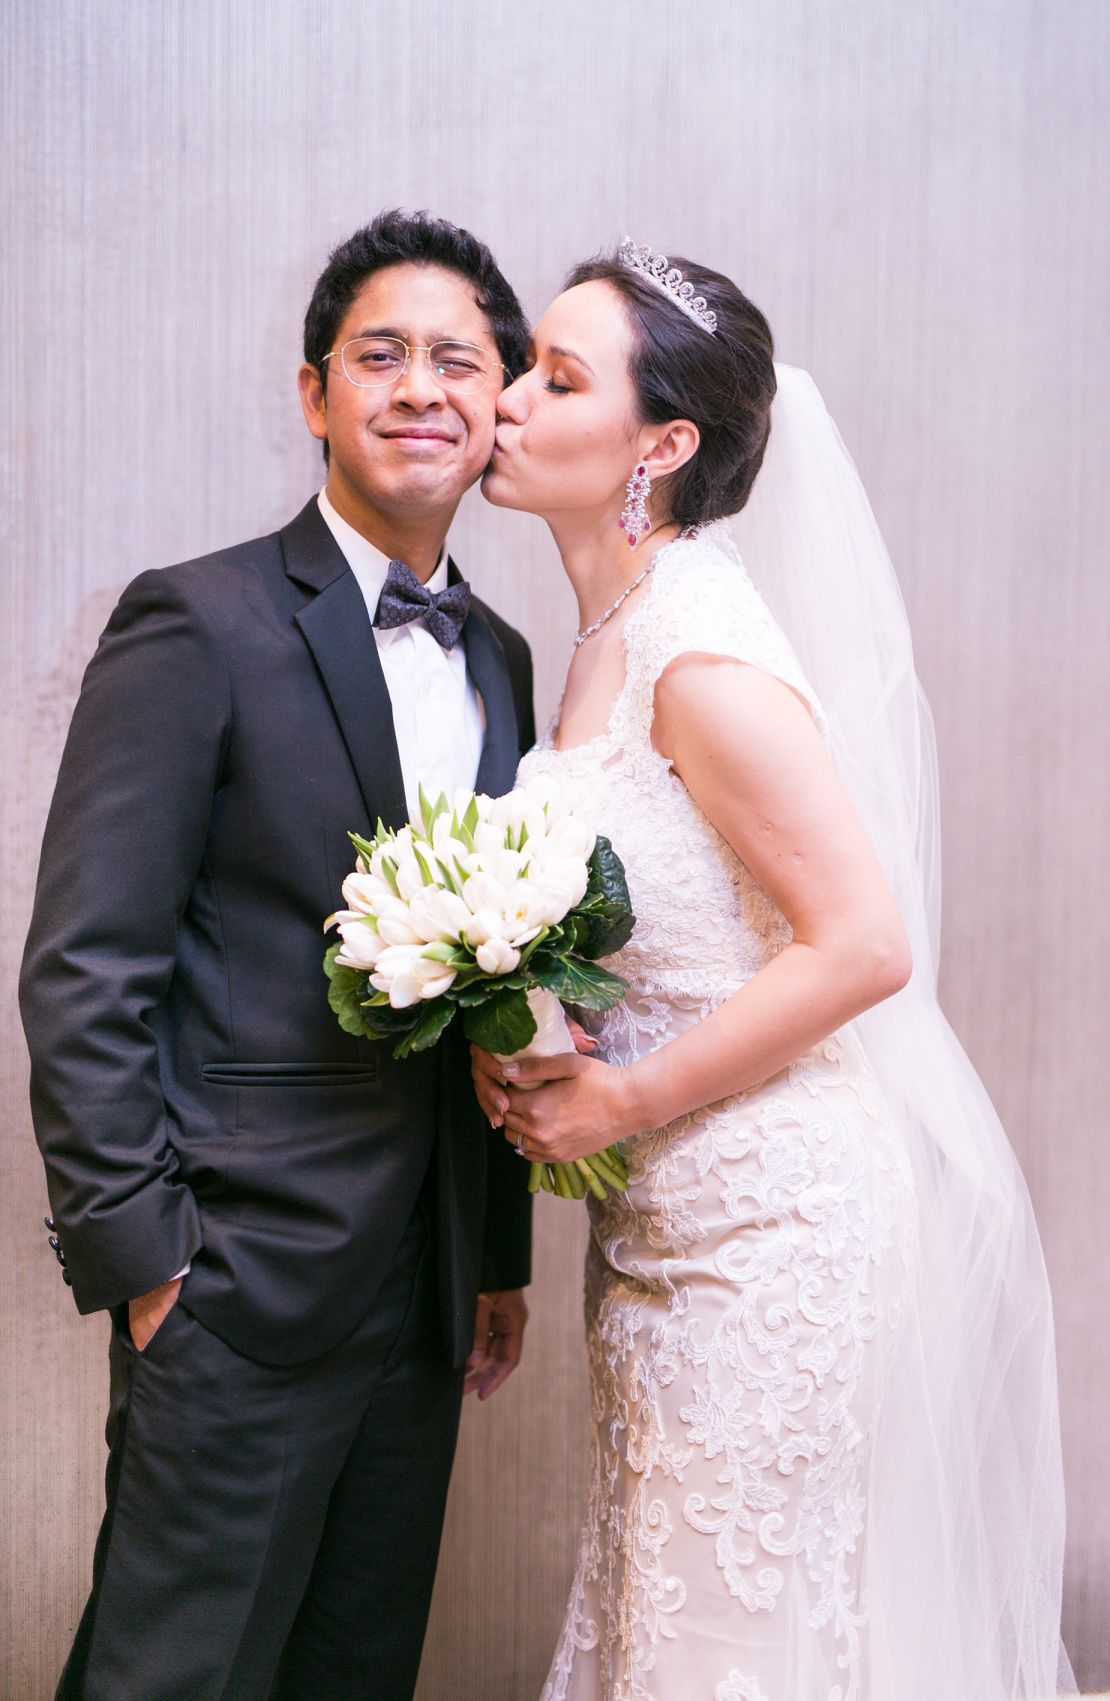 Ariff and Liliya got married in 2019, enjoying multiple wedding celebrations including a big party in Kuala Lumpur, Malaysia, where this photo was taken.